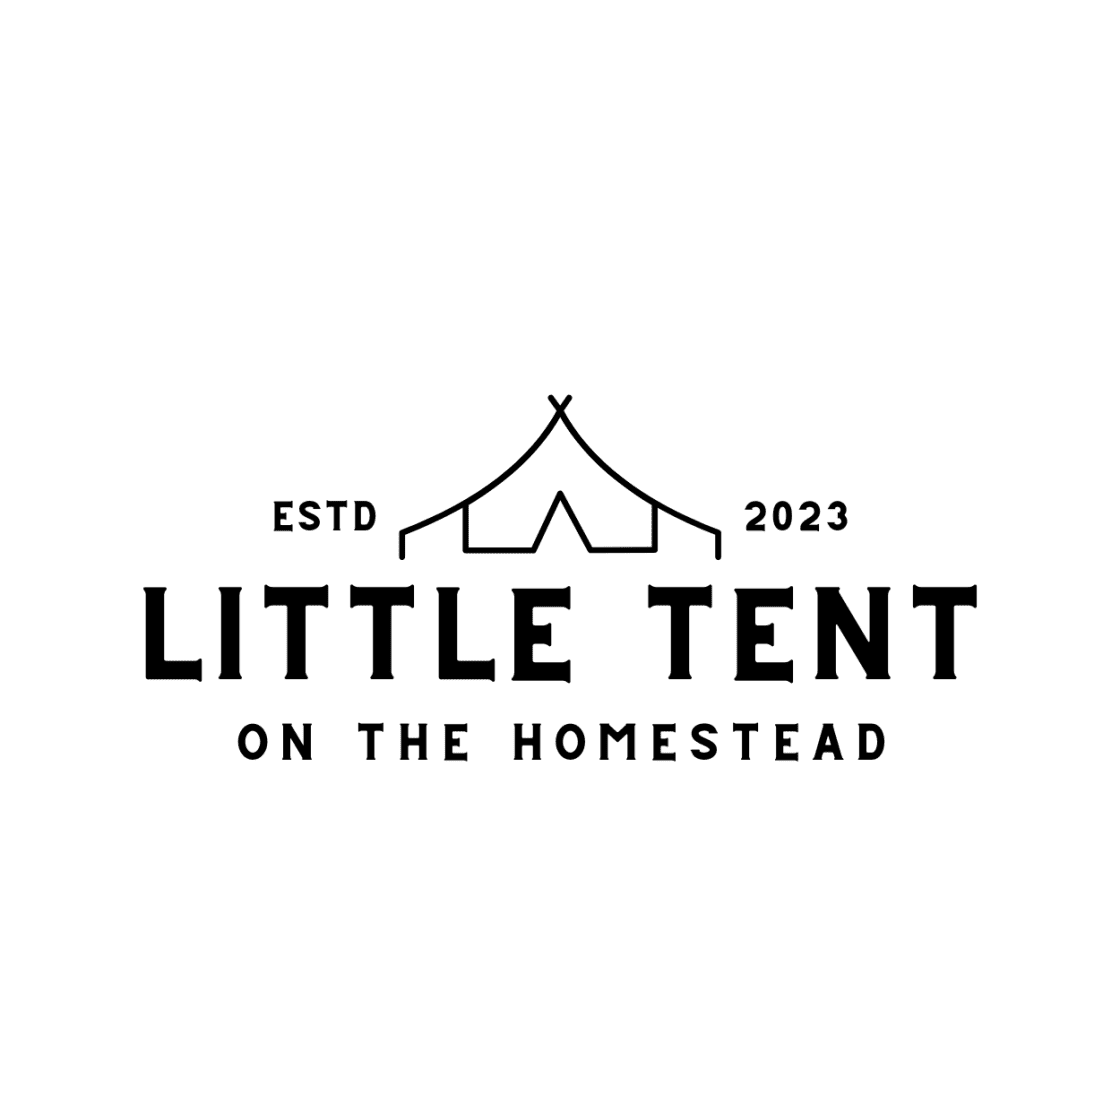 Little Tent on the Homestead